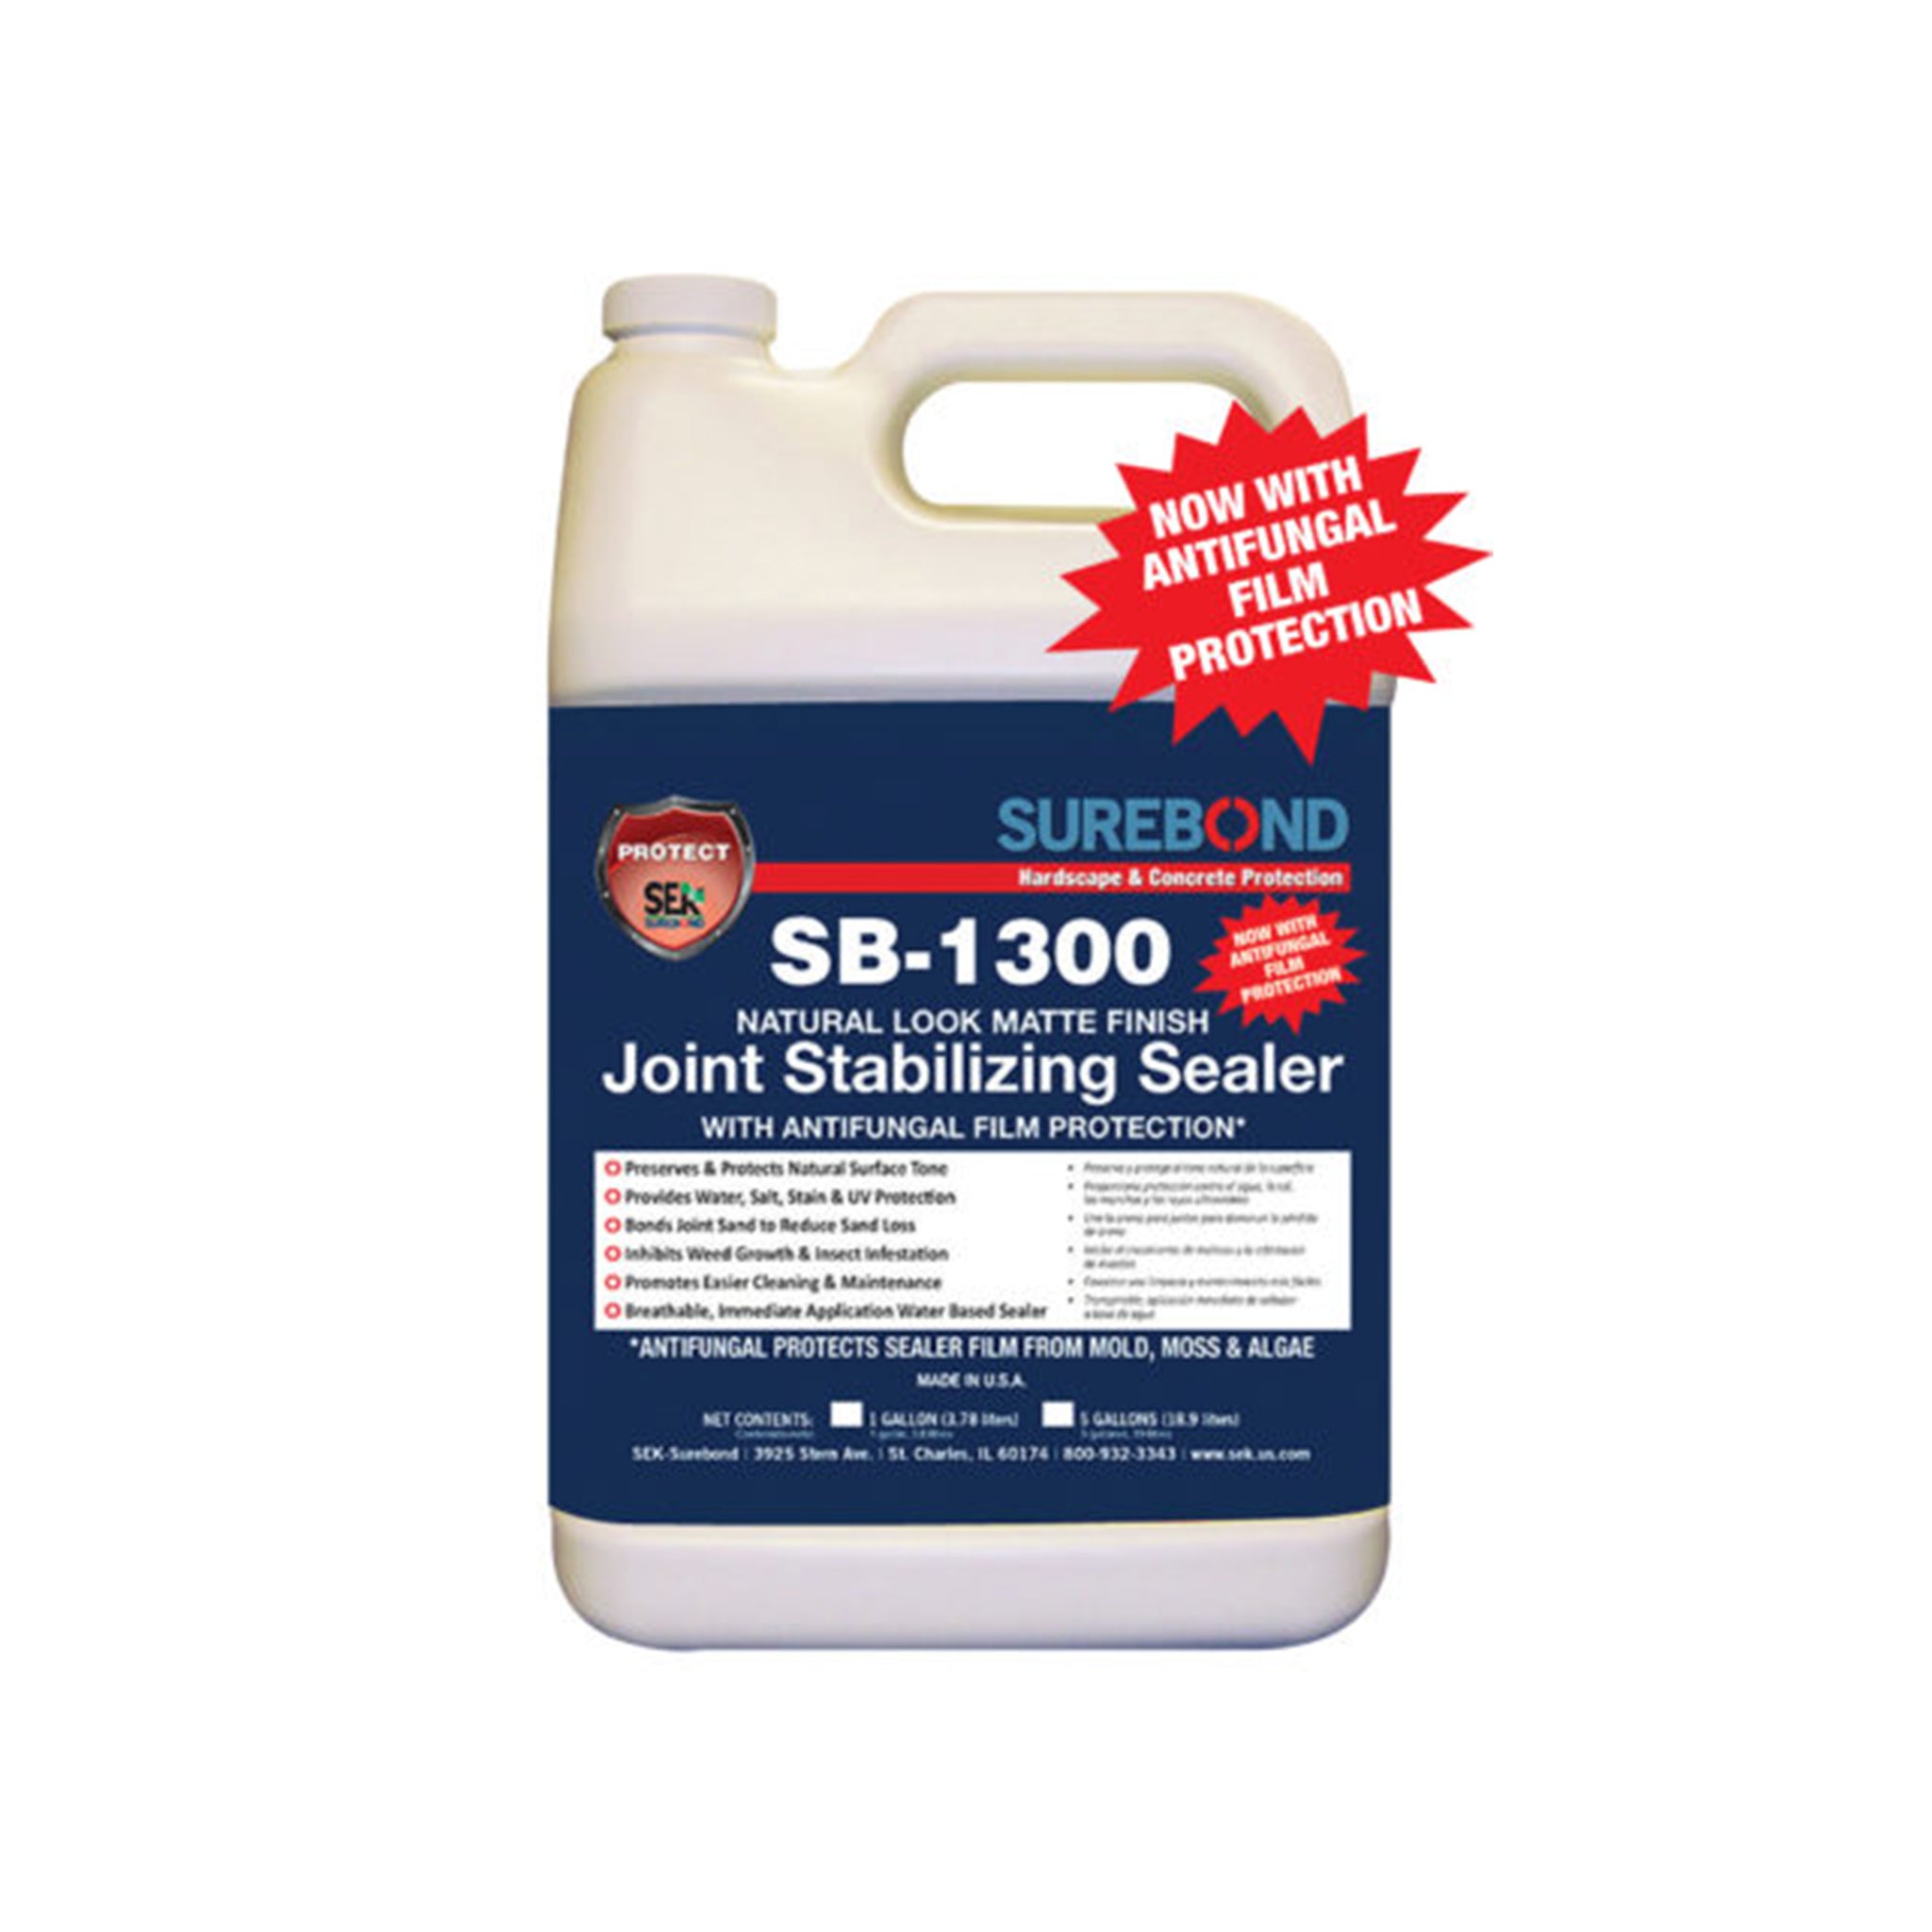 CoverSeal AC450 Acrylic Concrete Sealer With Superior Stain Resistance